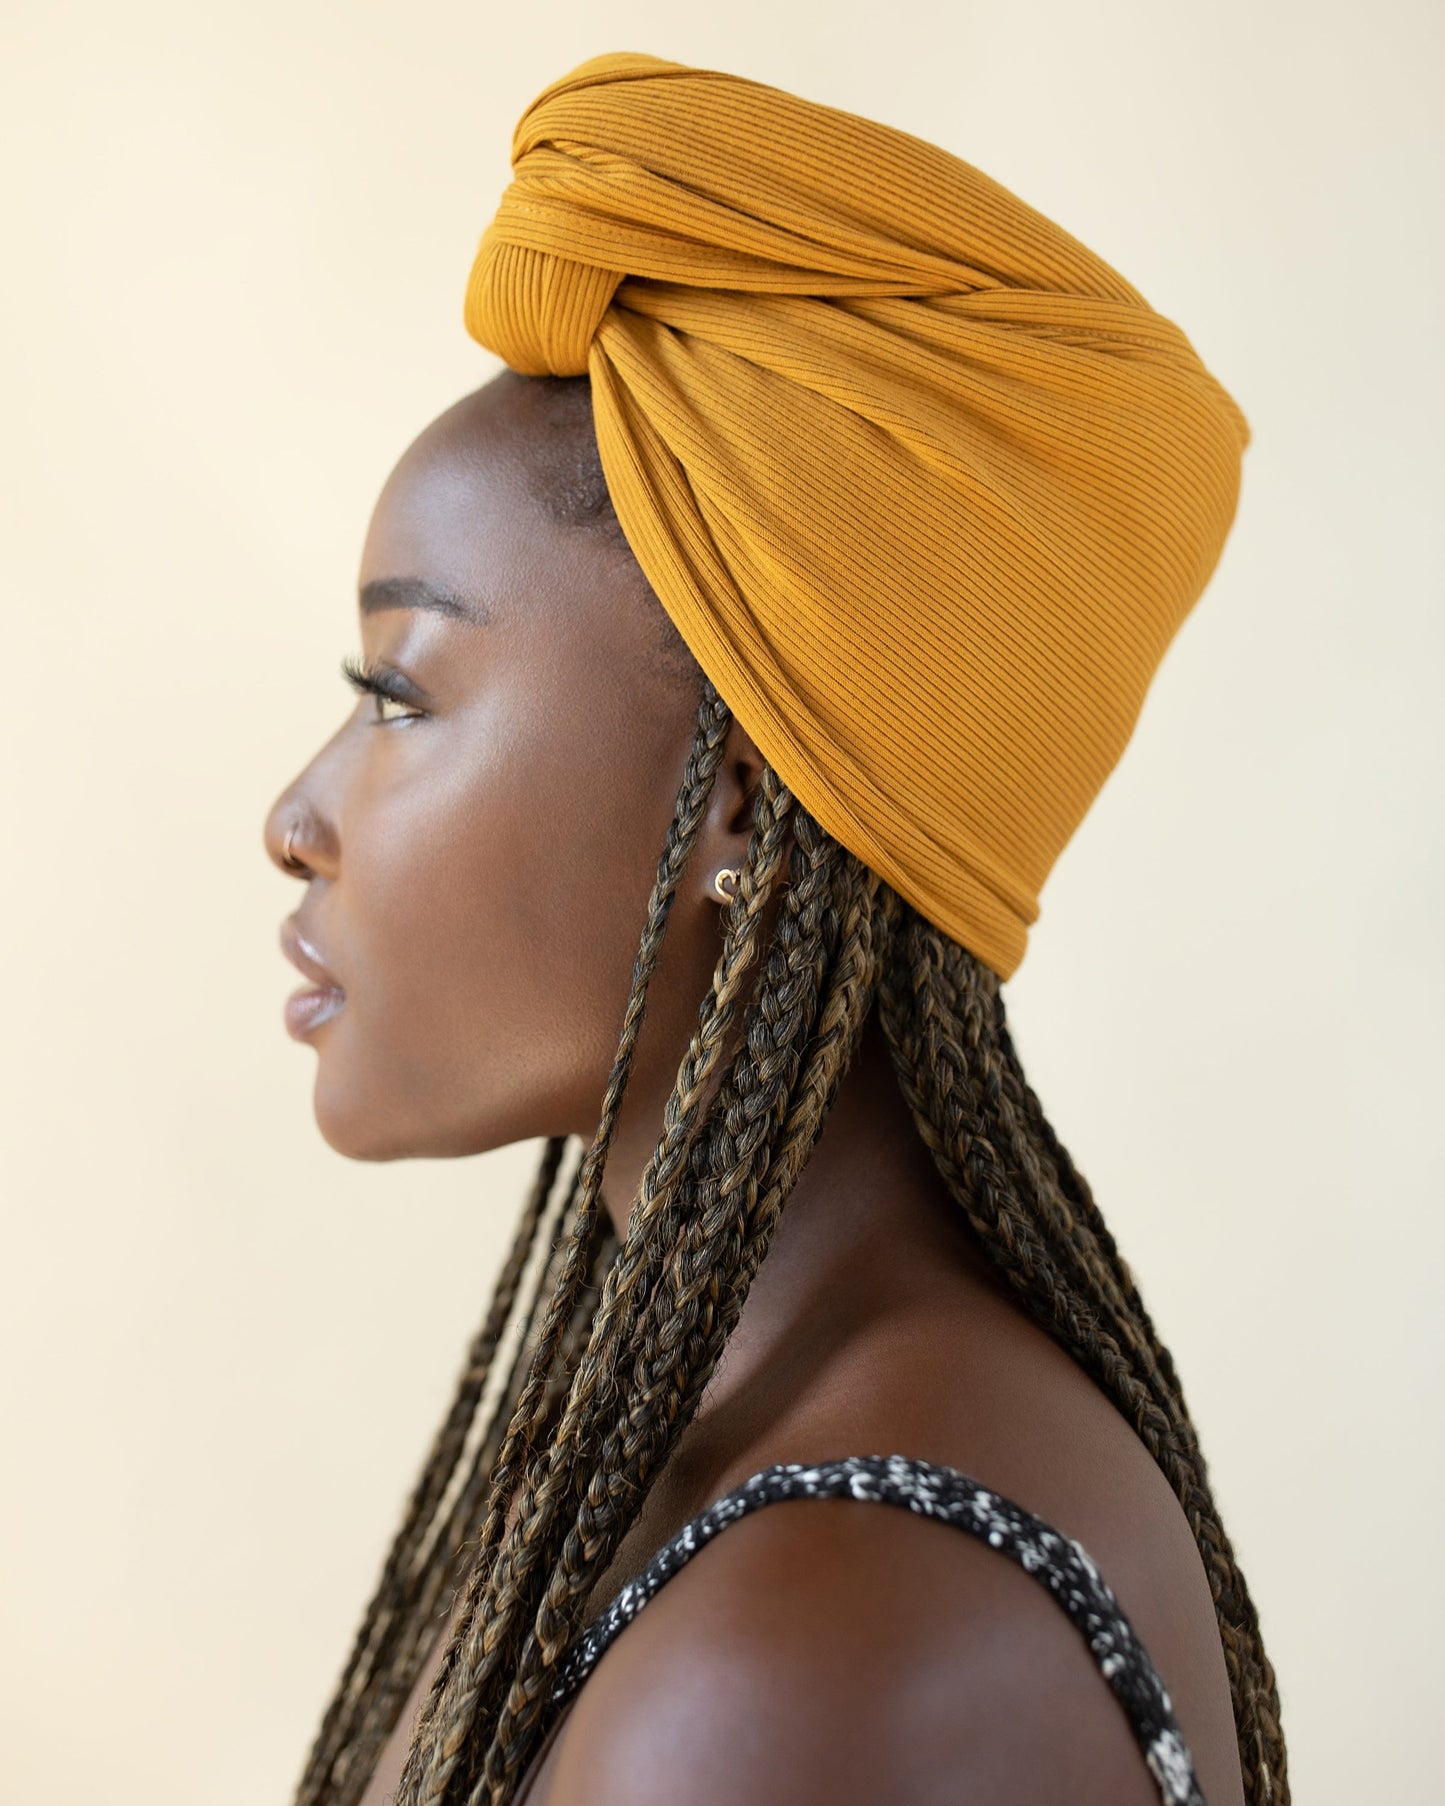 The Wrap Life Harvest Ribbed Head Wrap in Saffron Yellow Head Wrap